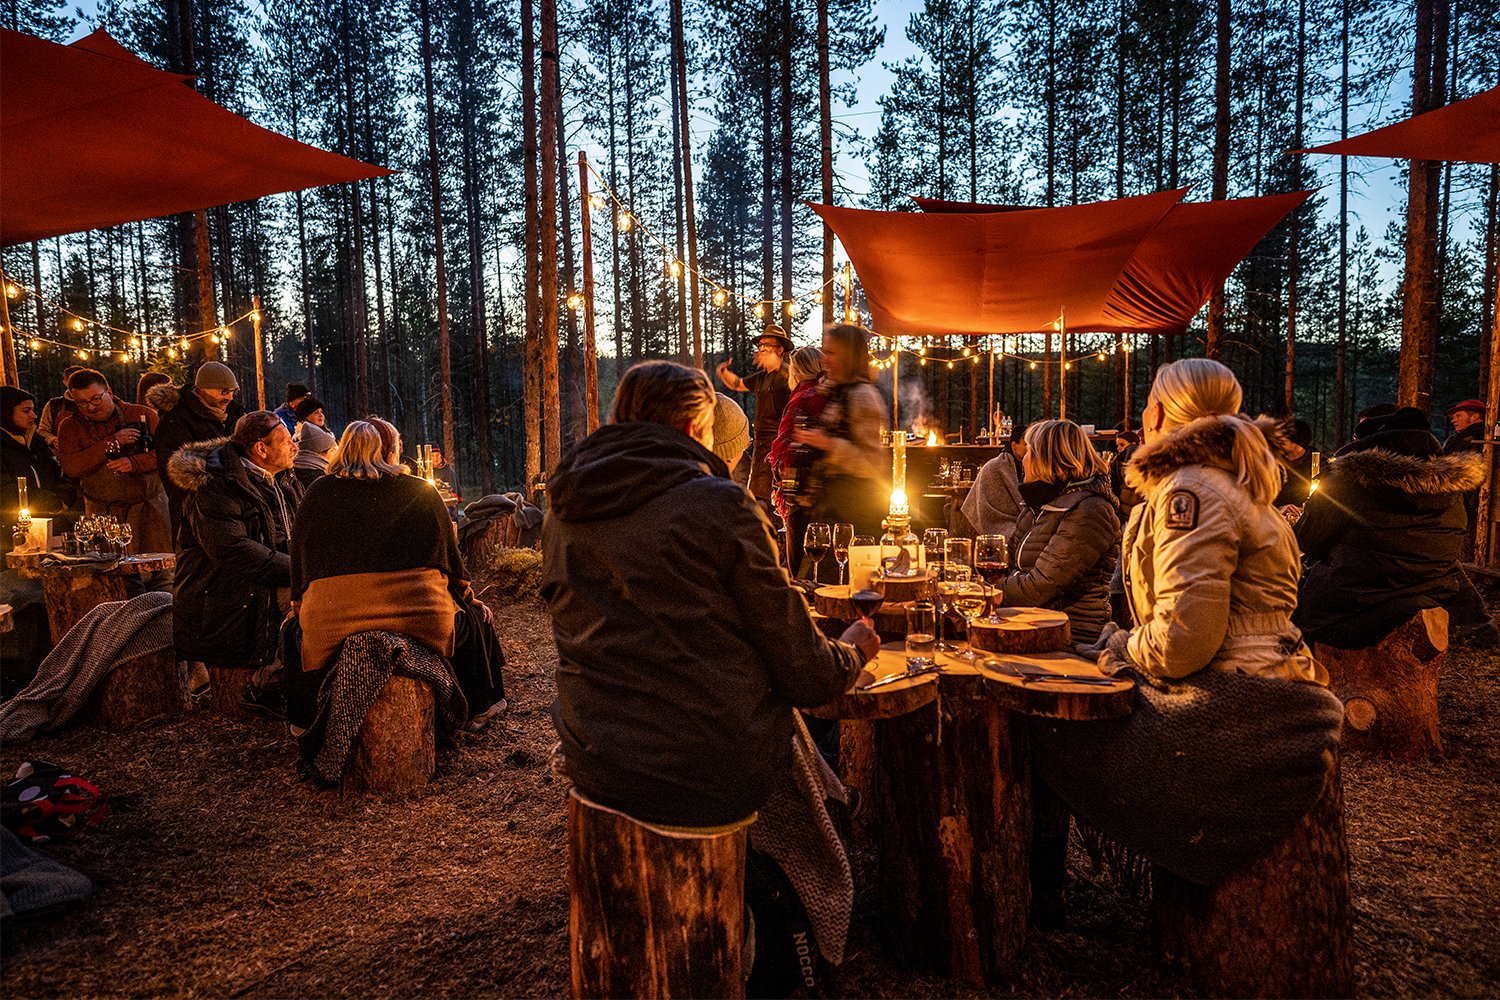 Diners gathered at tables at Stars du Nord 2022 in Swedish Lapland